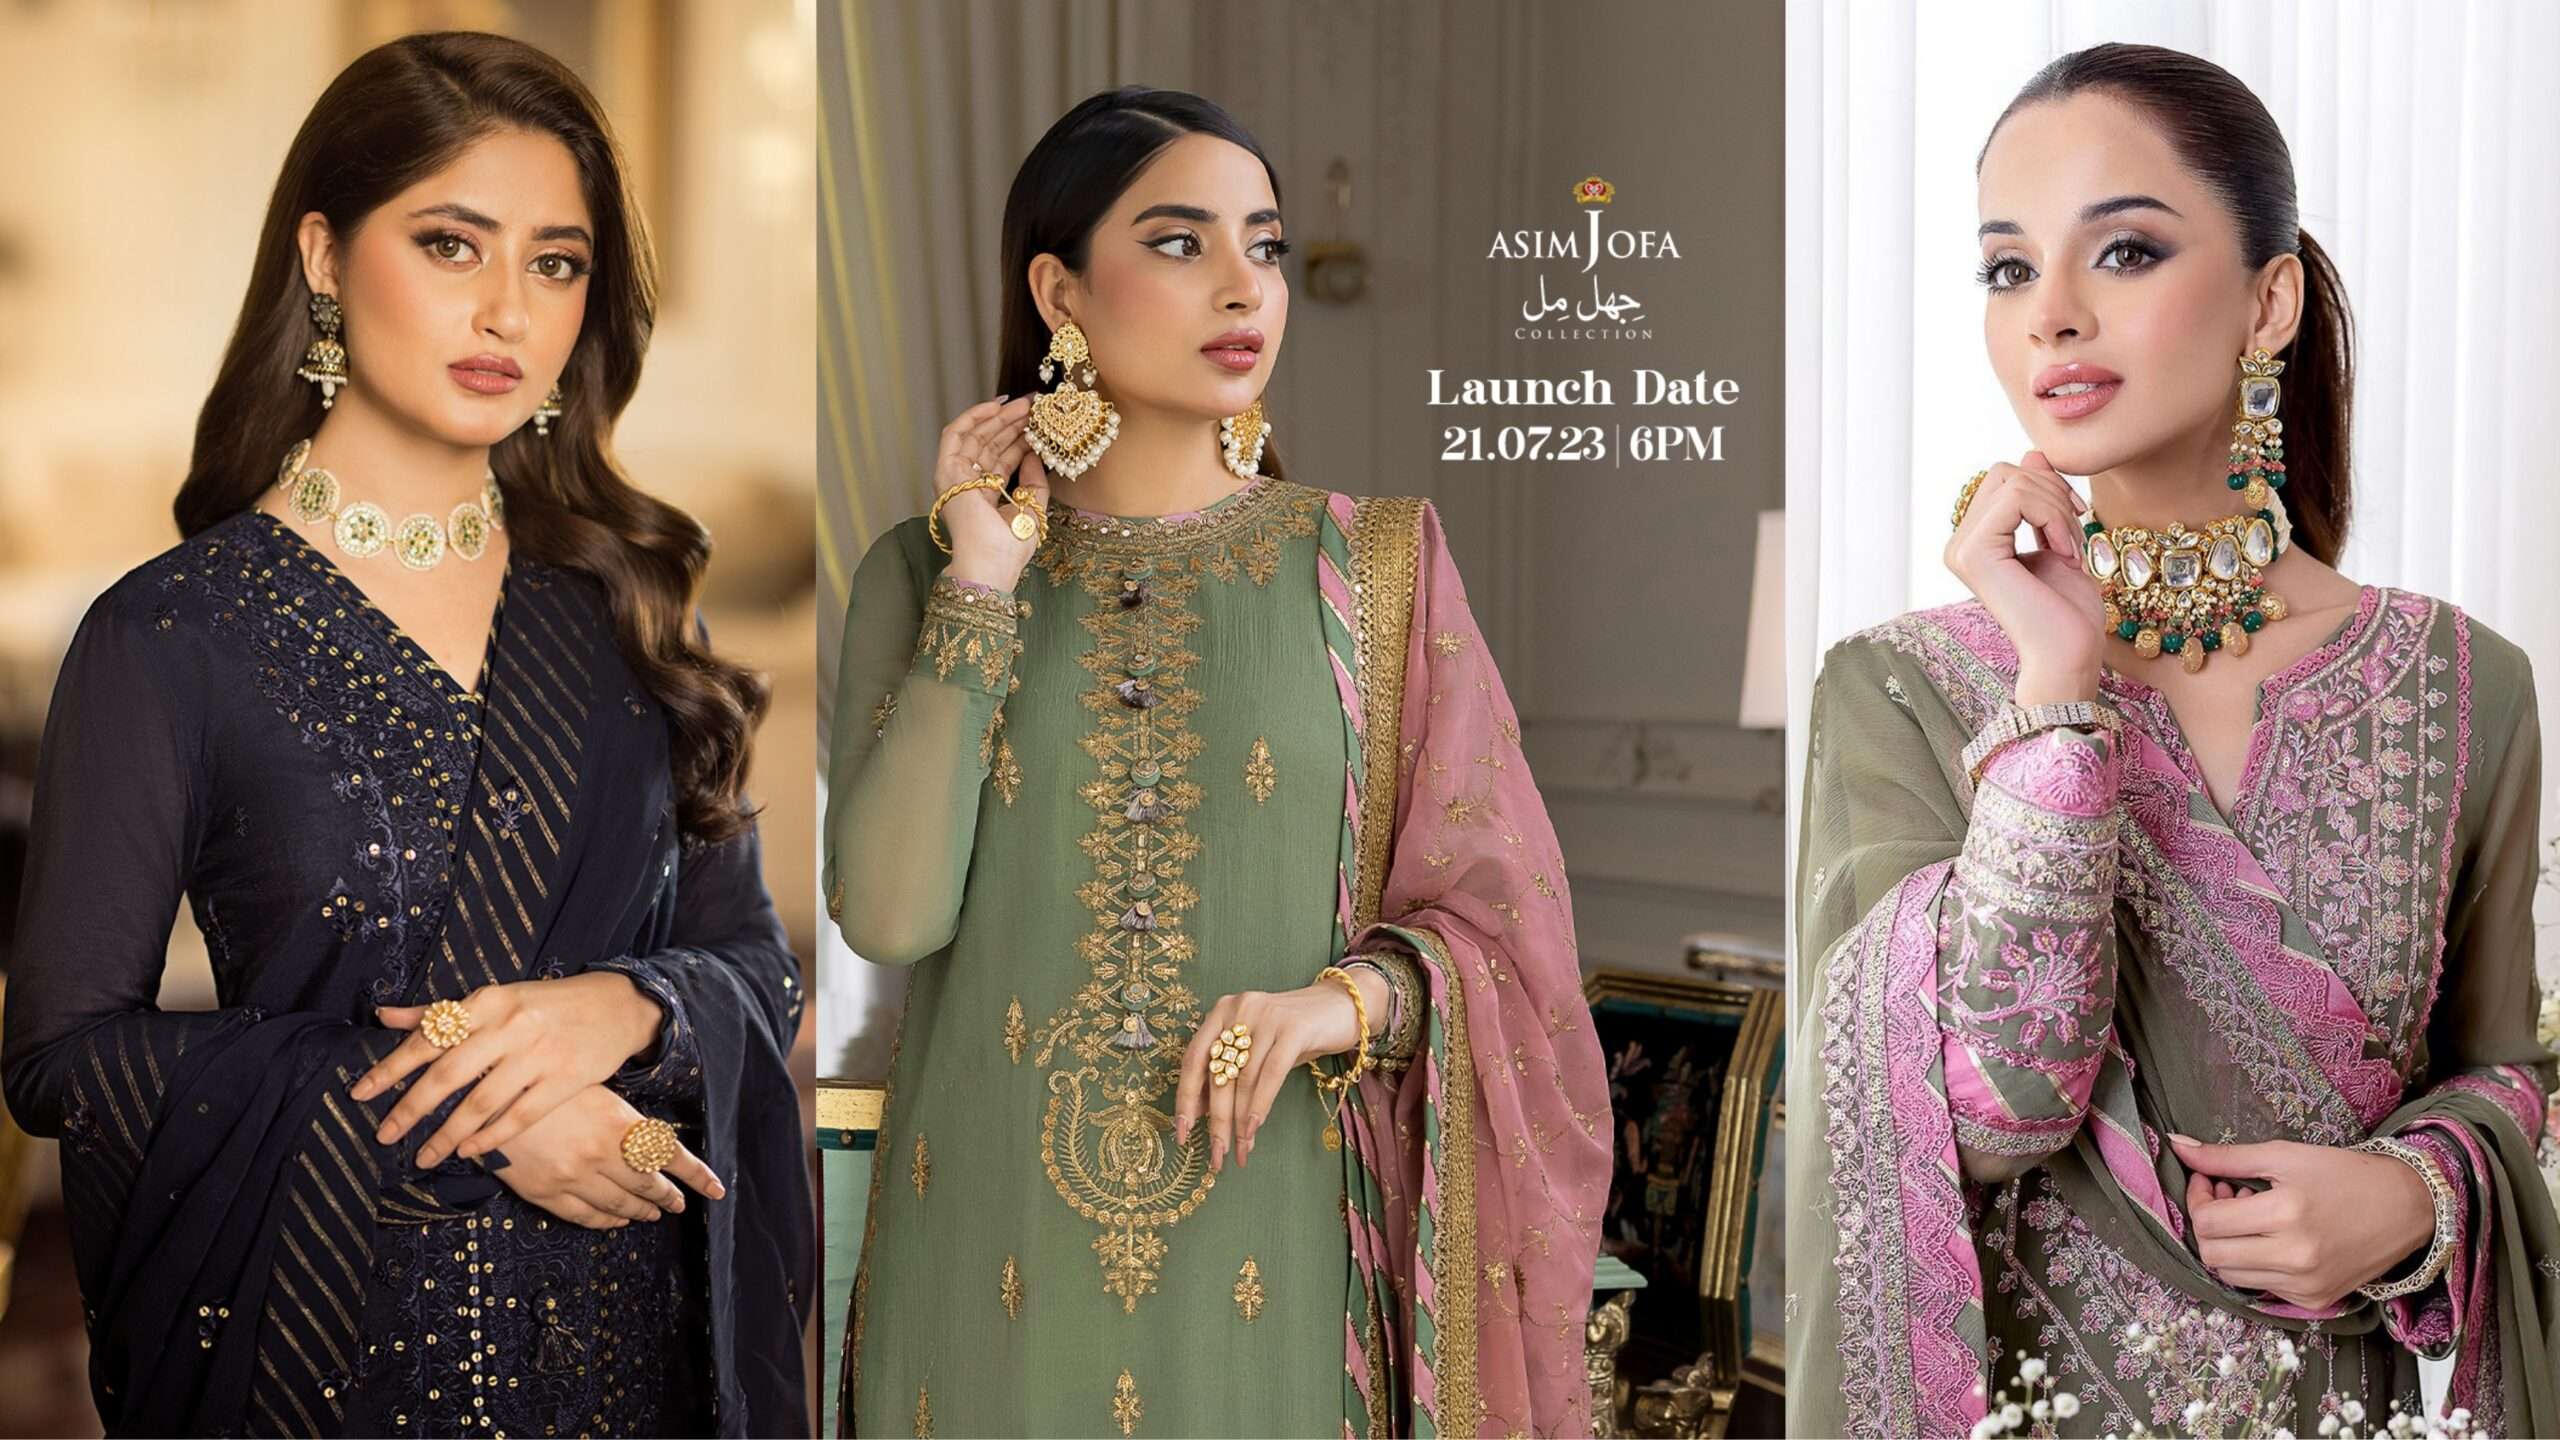 Asim Jofa: Jhilmil collection pre-booking to start on 21 July at 6 pm